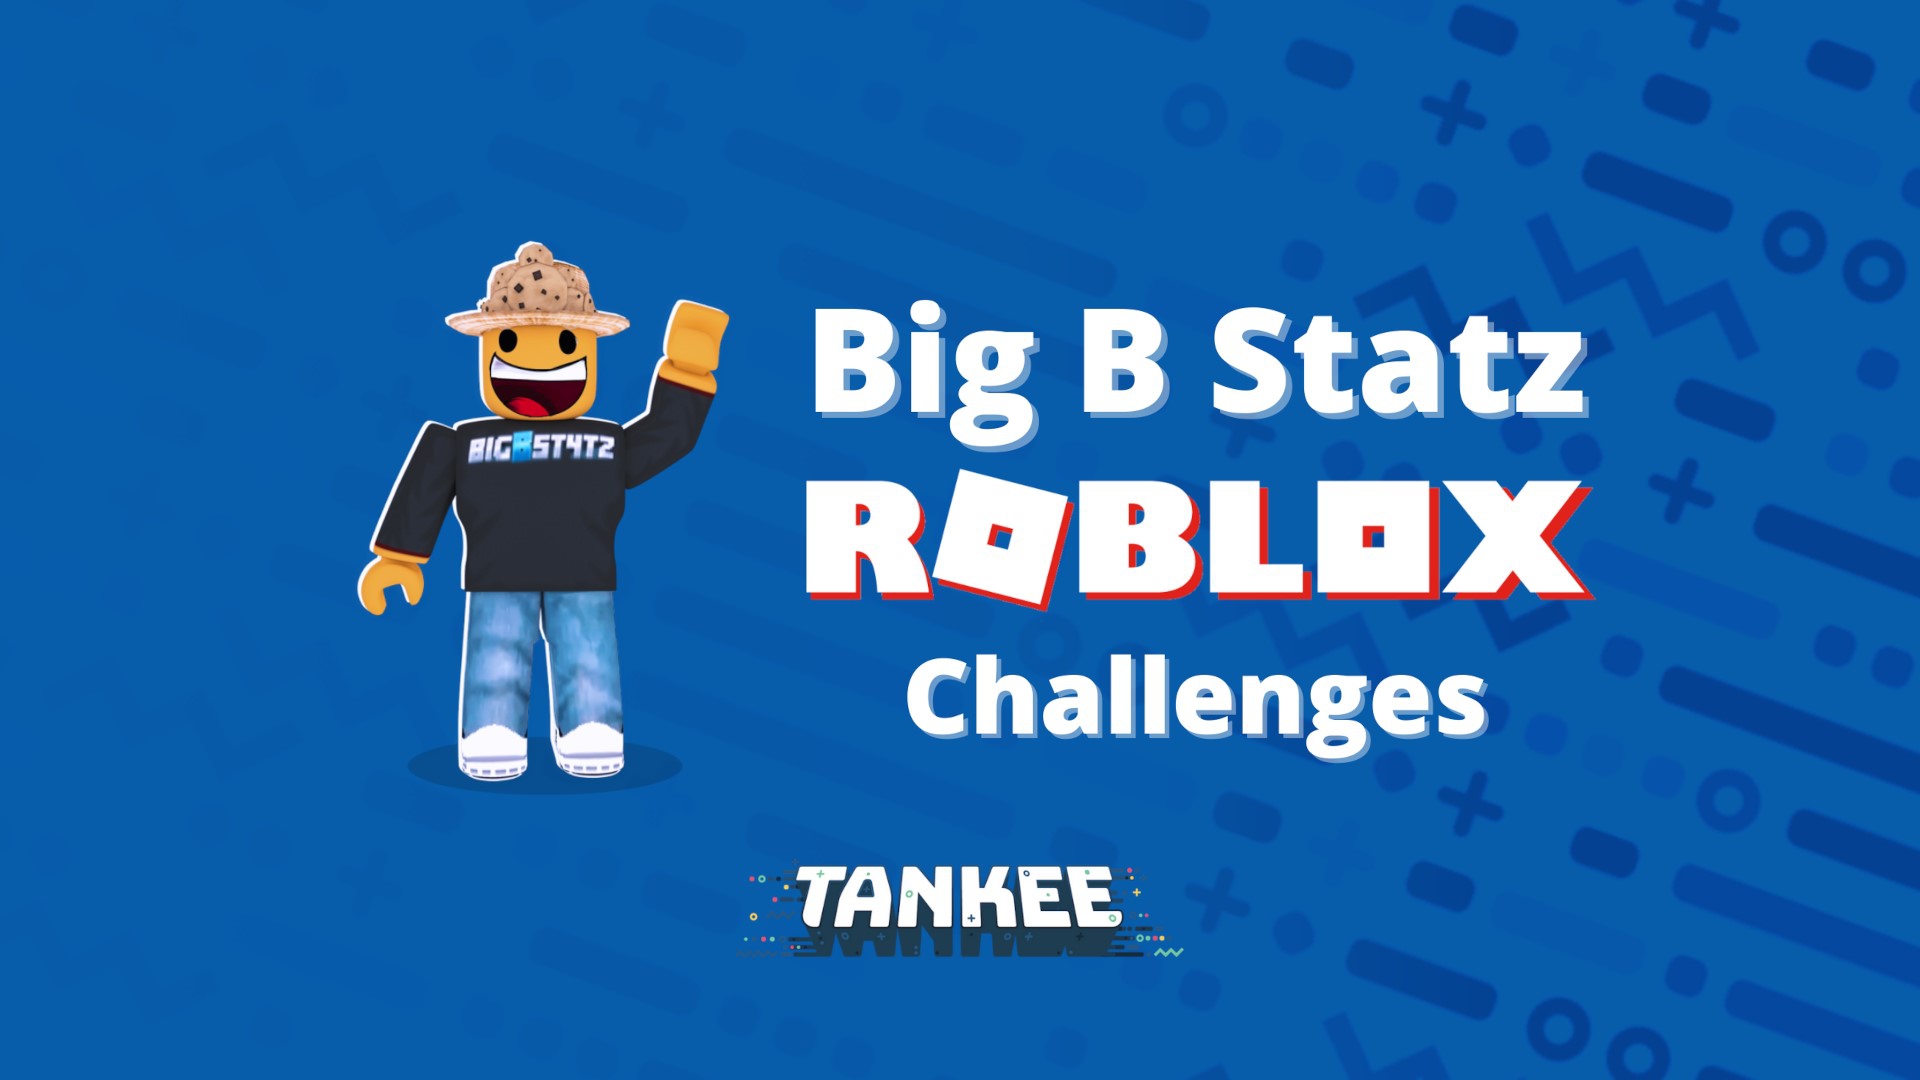 Bigb Roblox Challenges By Tankee Season 2 Episodes Streaming Online For Free The Roku Channel Roku - roblox try not to laugh challenge part 2